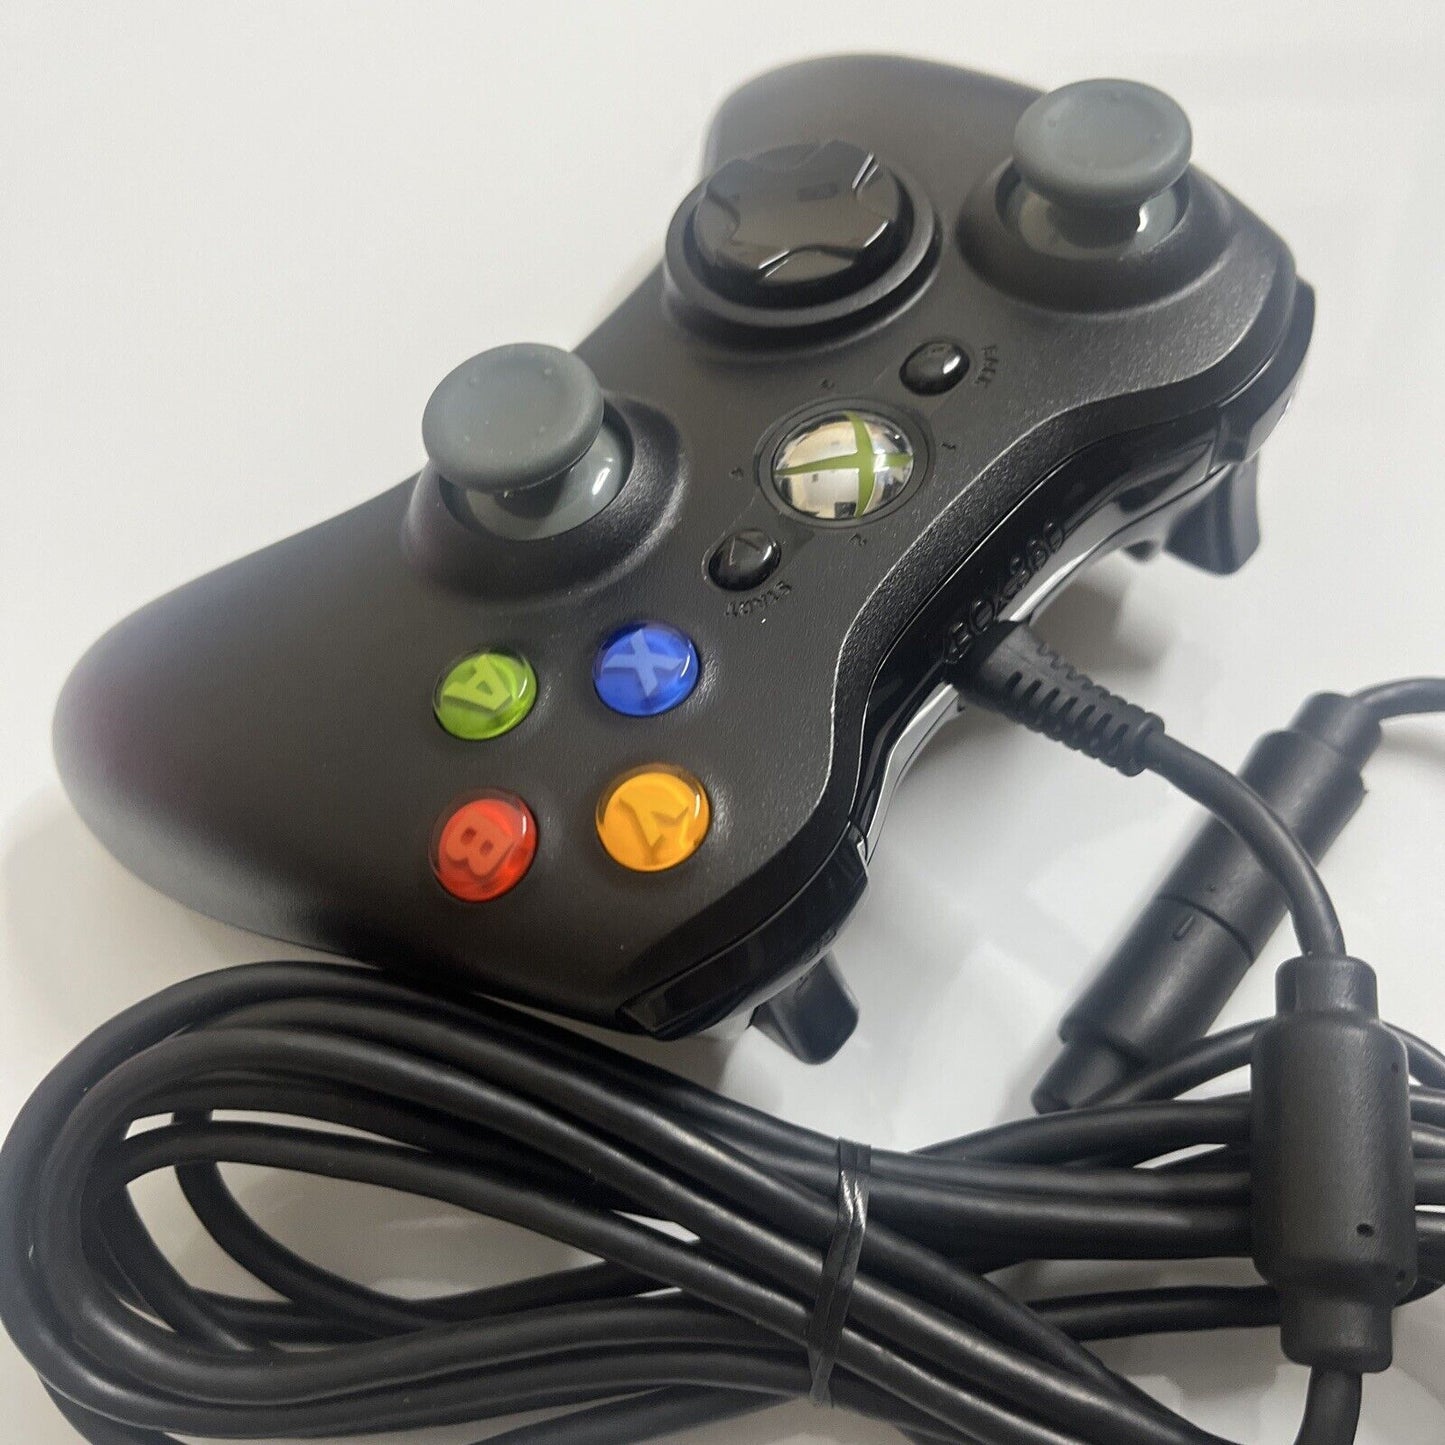 Genuine Official Microsoft Xbox 360 Controller Wired USB Black for PC XBOX 360